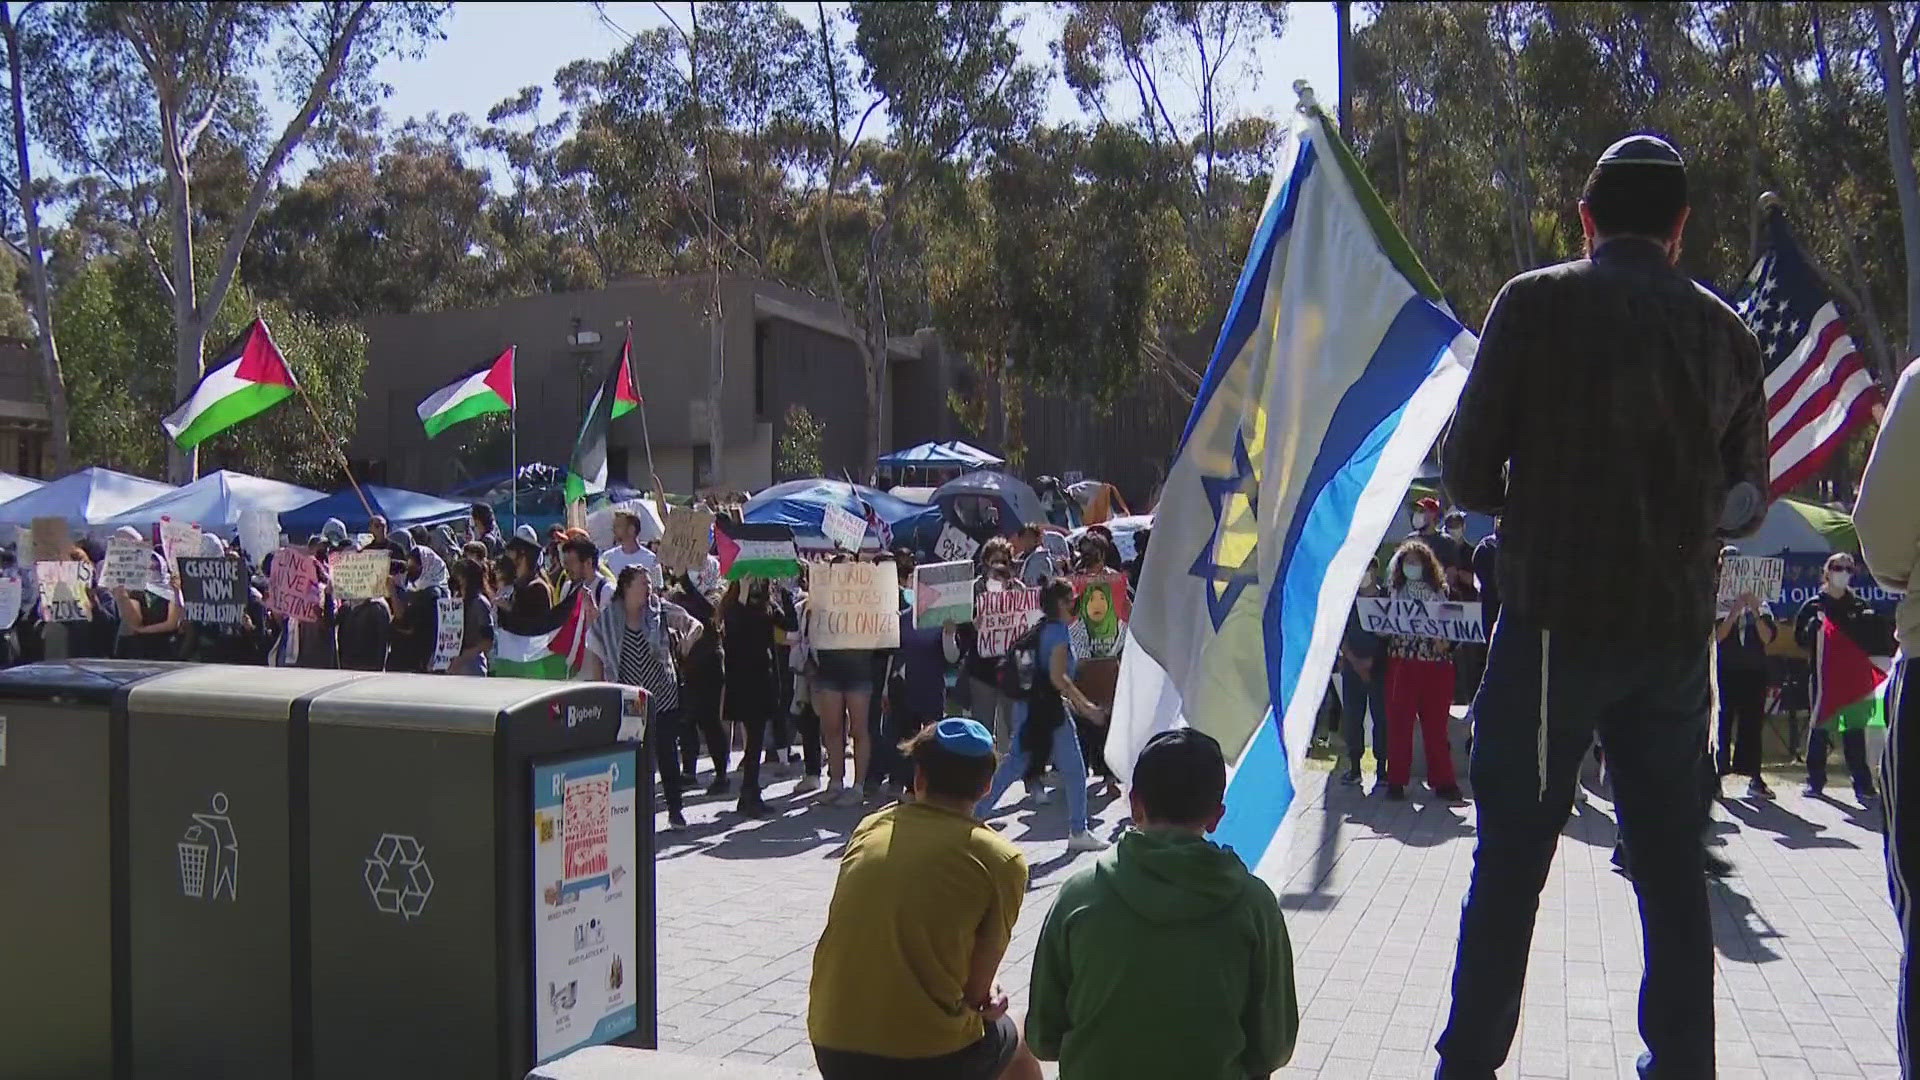 Pro-Israel demonstrators march past the pro-Palestinian encampment on the UC San Diego campus.